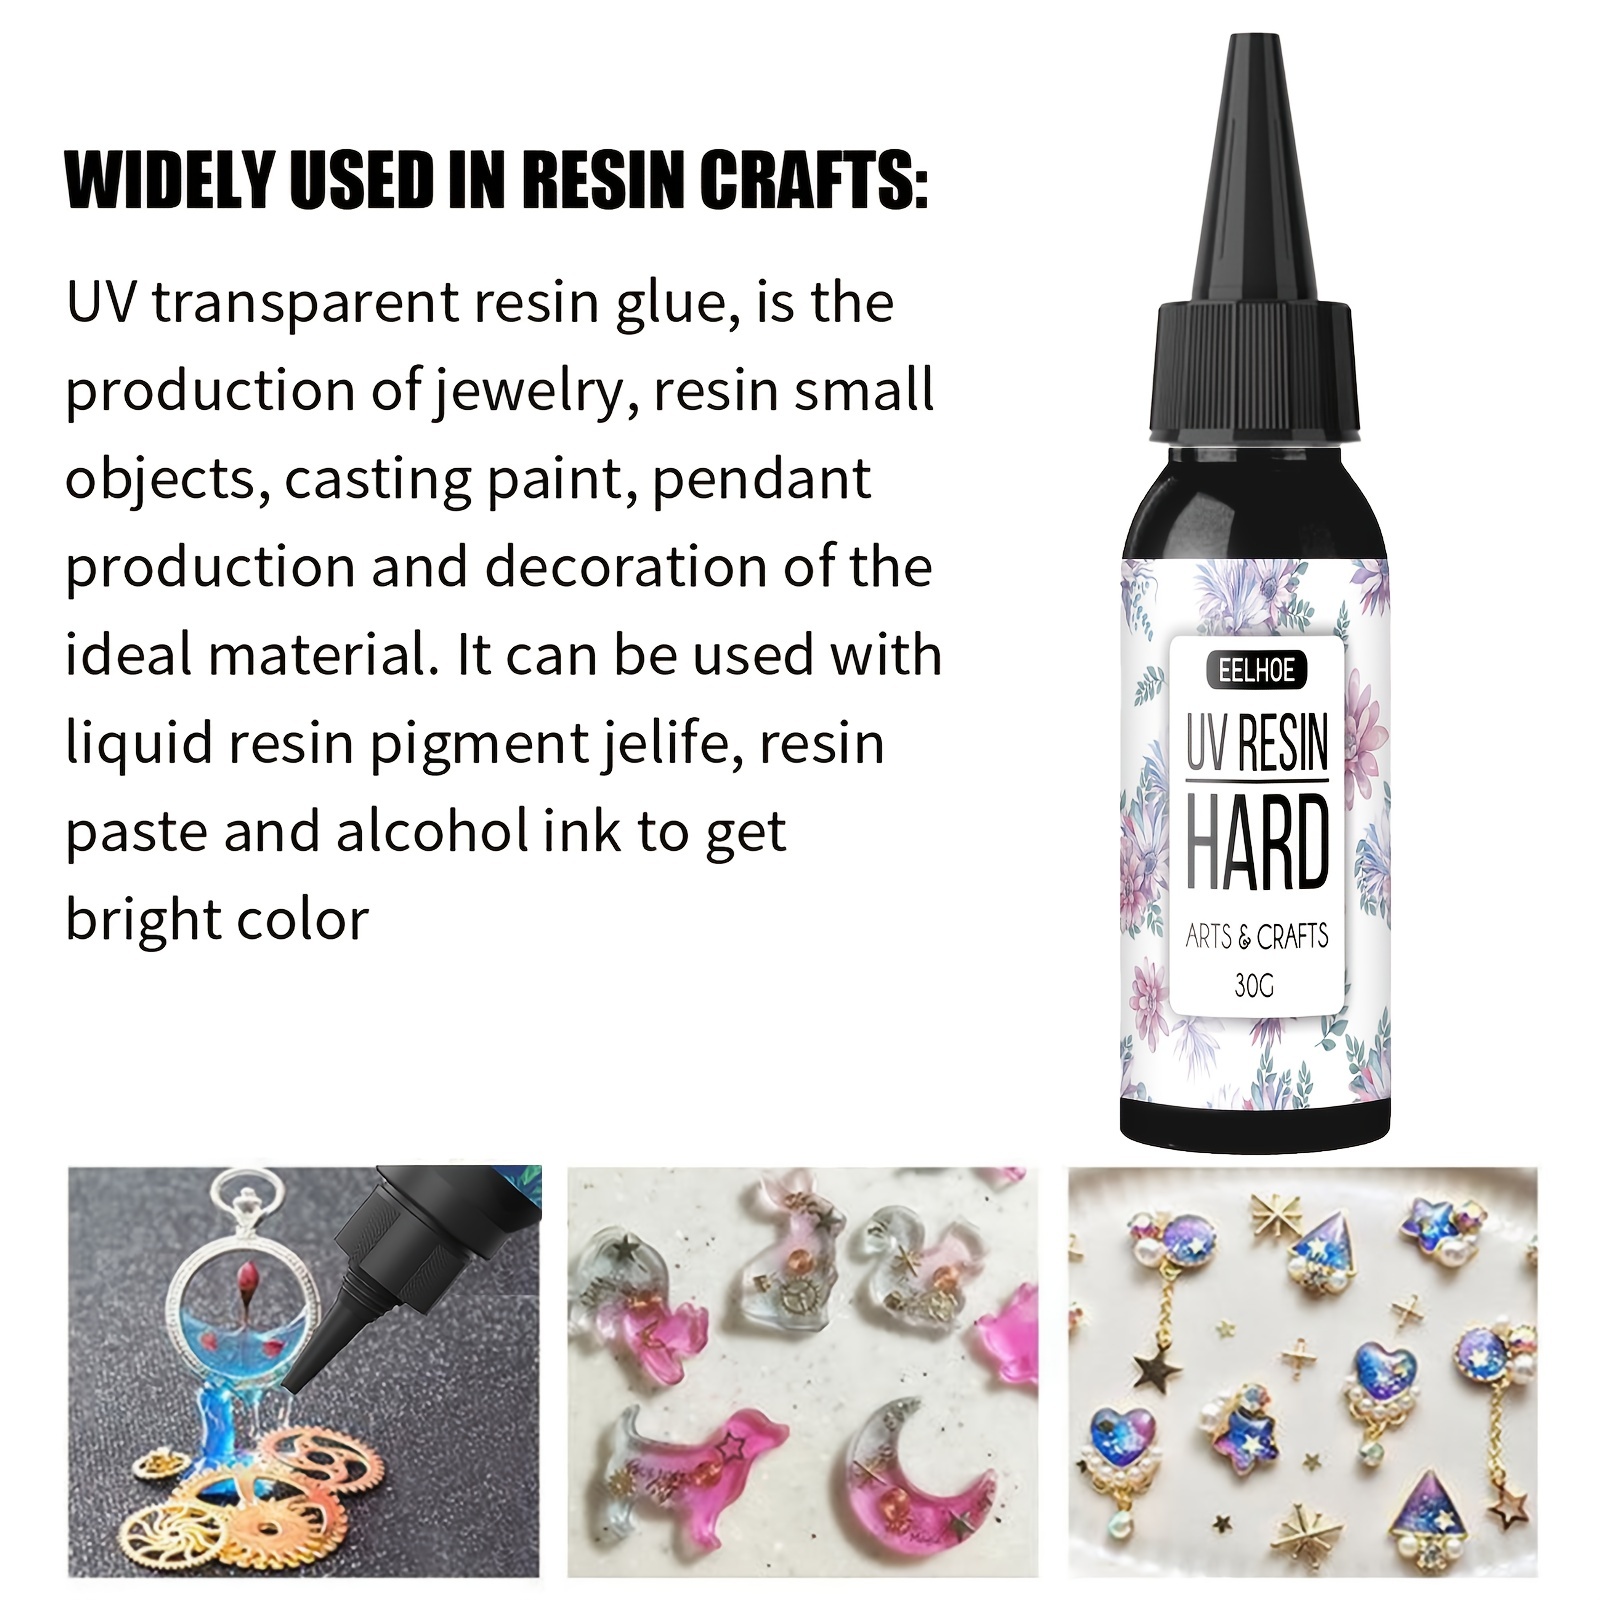  100G Black UV Resin-Upgrade Quick Cure! Hard Type Color Resin, UV  Glue Ultraviolet Curing, Solar Cure Sunlight Activated Resin Clear Adhesive  Glue for Jewelry Making-Black : Arts, Crafts & Sewing